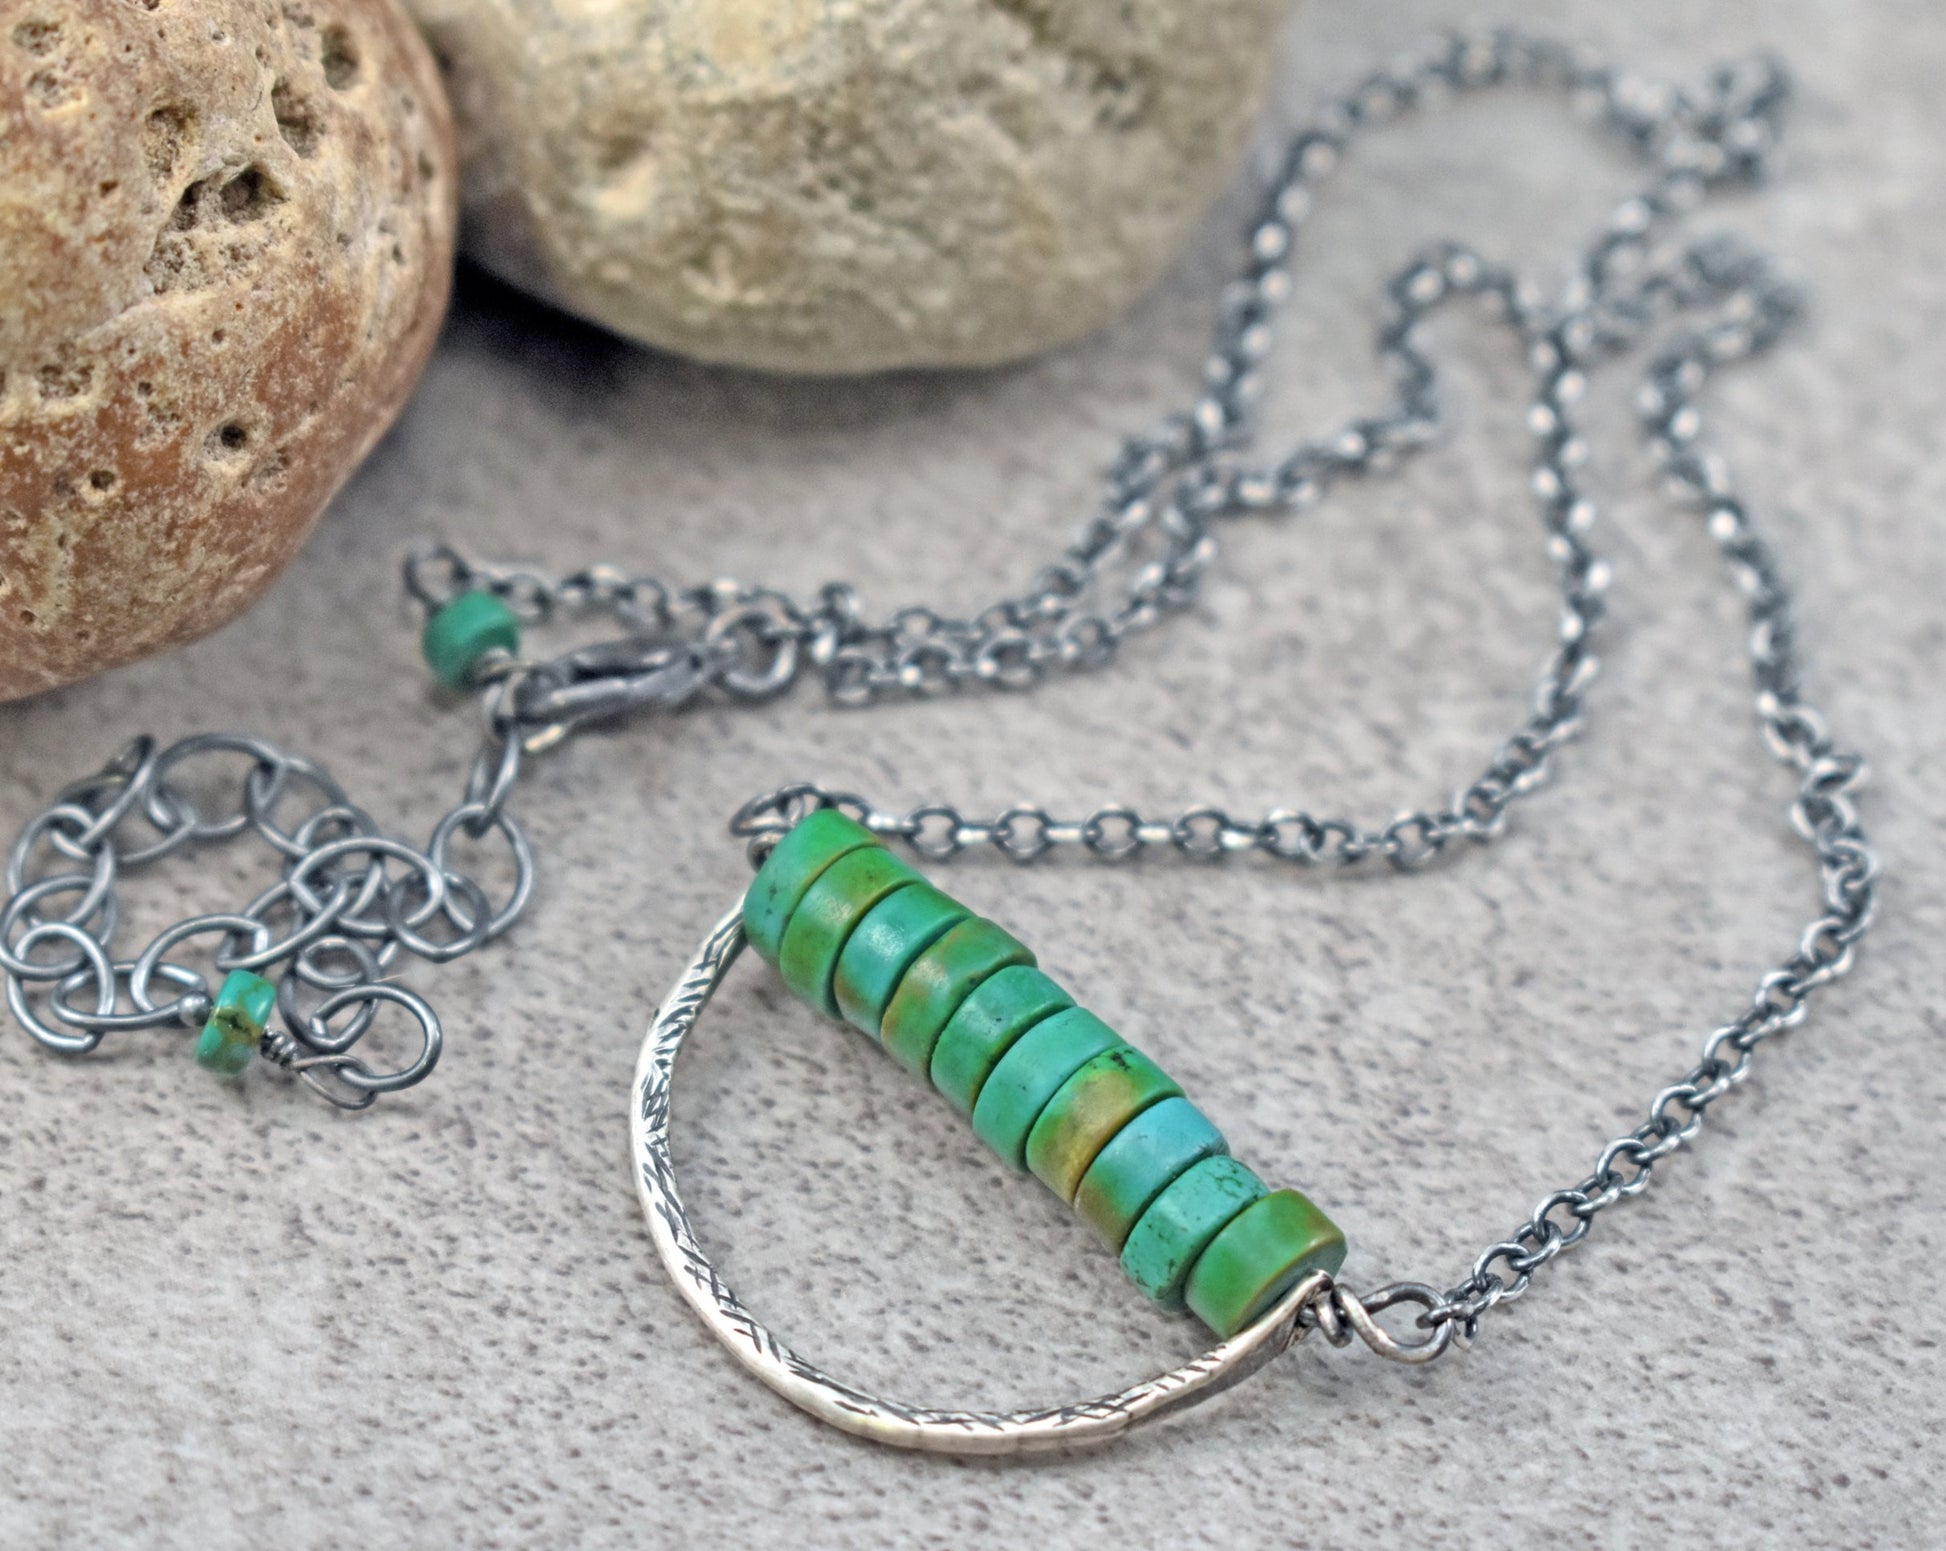 Simple Turquoise Sterling Silver Necklace, Unique Boho Style Jewelry, Artisan Handmade, Rusic Green Stone